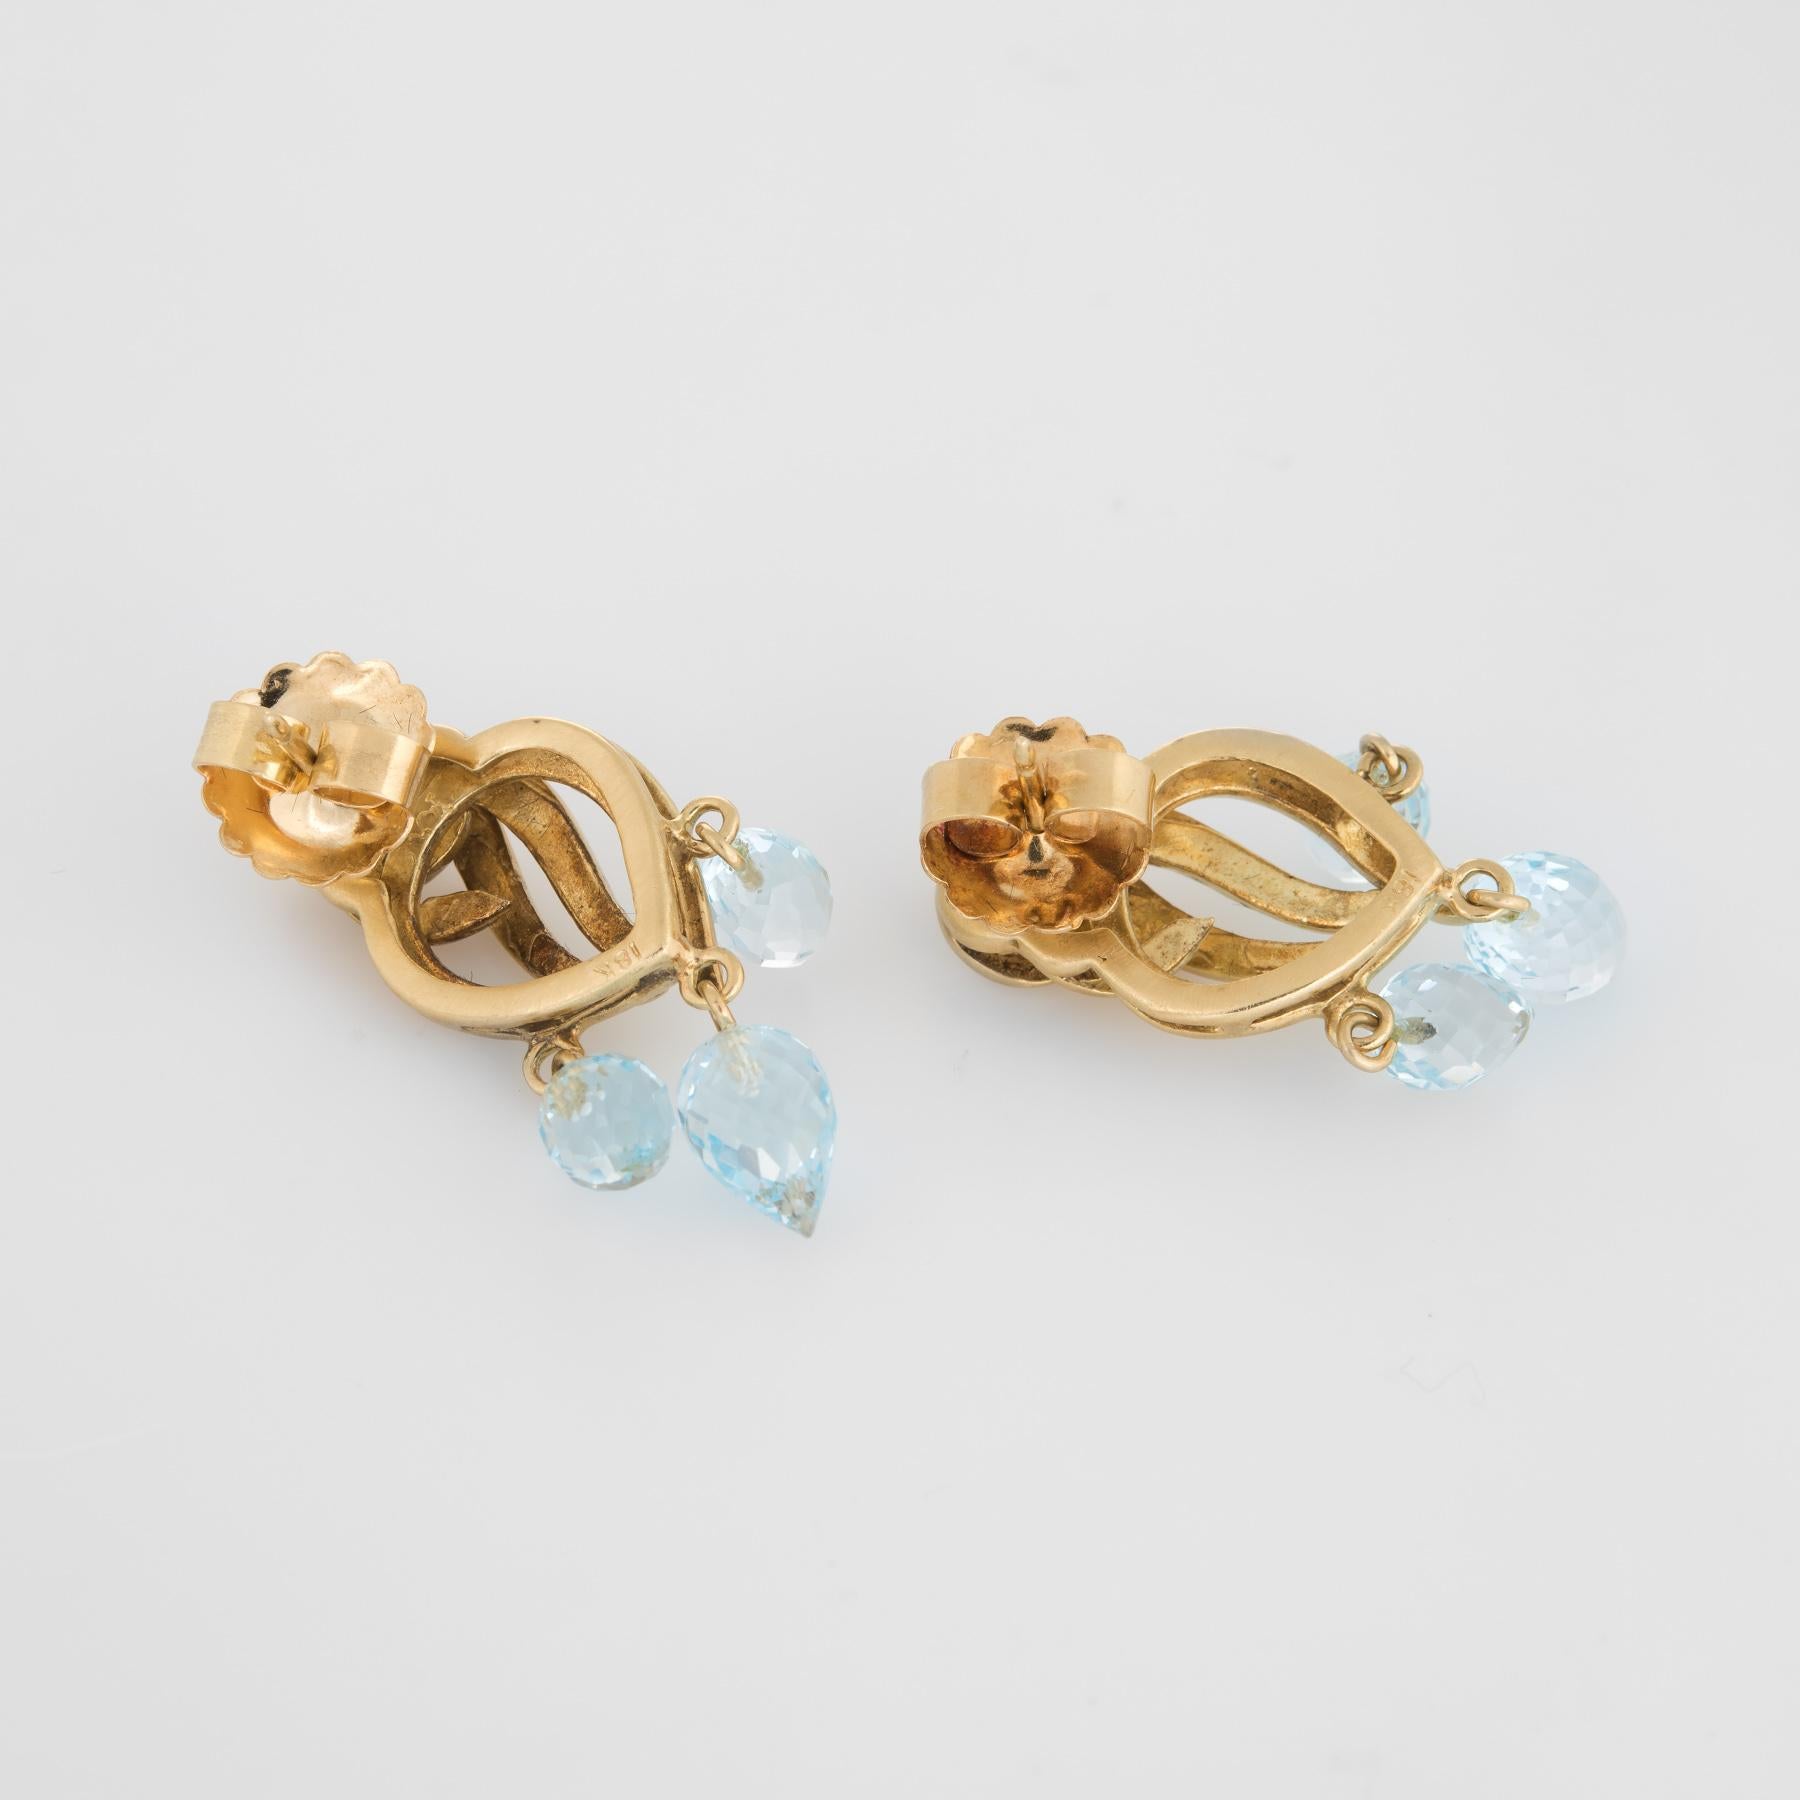 Finely detailed pair of estate aquamarine drop earrings, crafted in 18k yellow gold. 

Six aquamarine briolette's graduate in size from 7mm x 5mm to 9mm x 5mm. The aquamarines are in excellent condition and free of cracks or chips.  

The charming